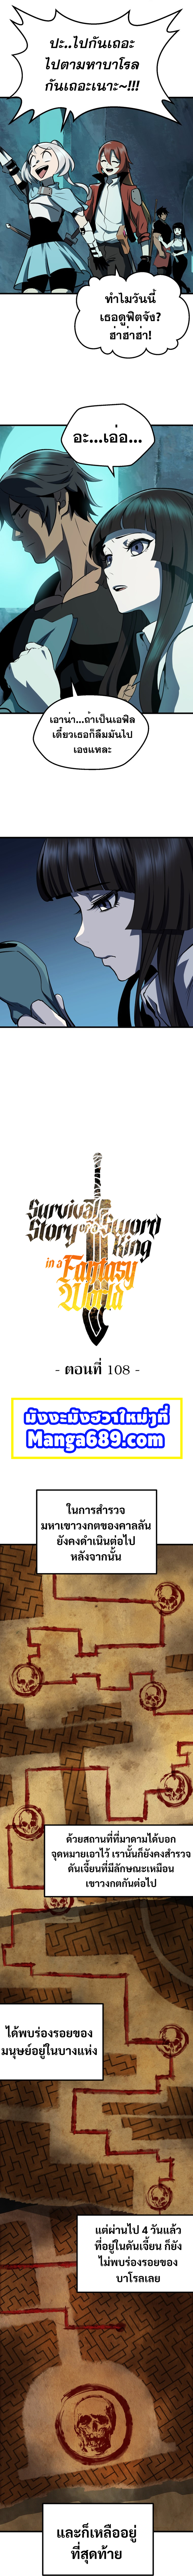 Survival Of Blade King 108 (6)